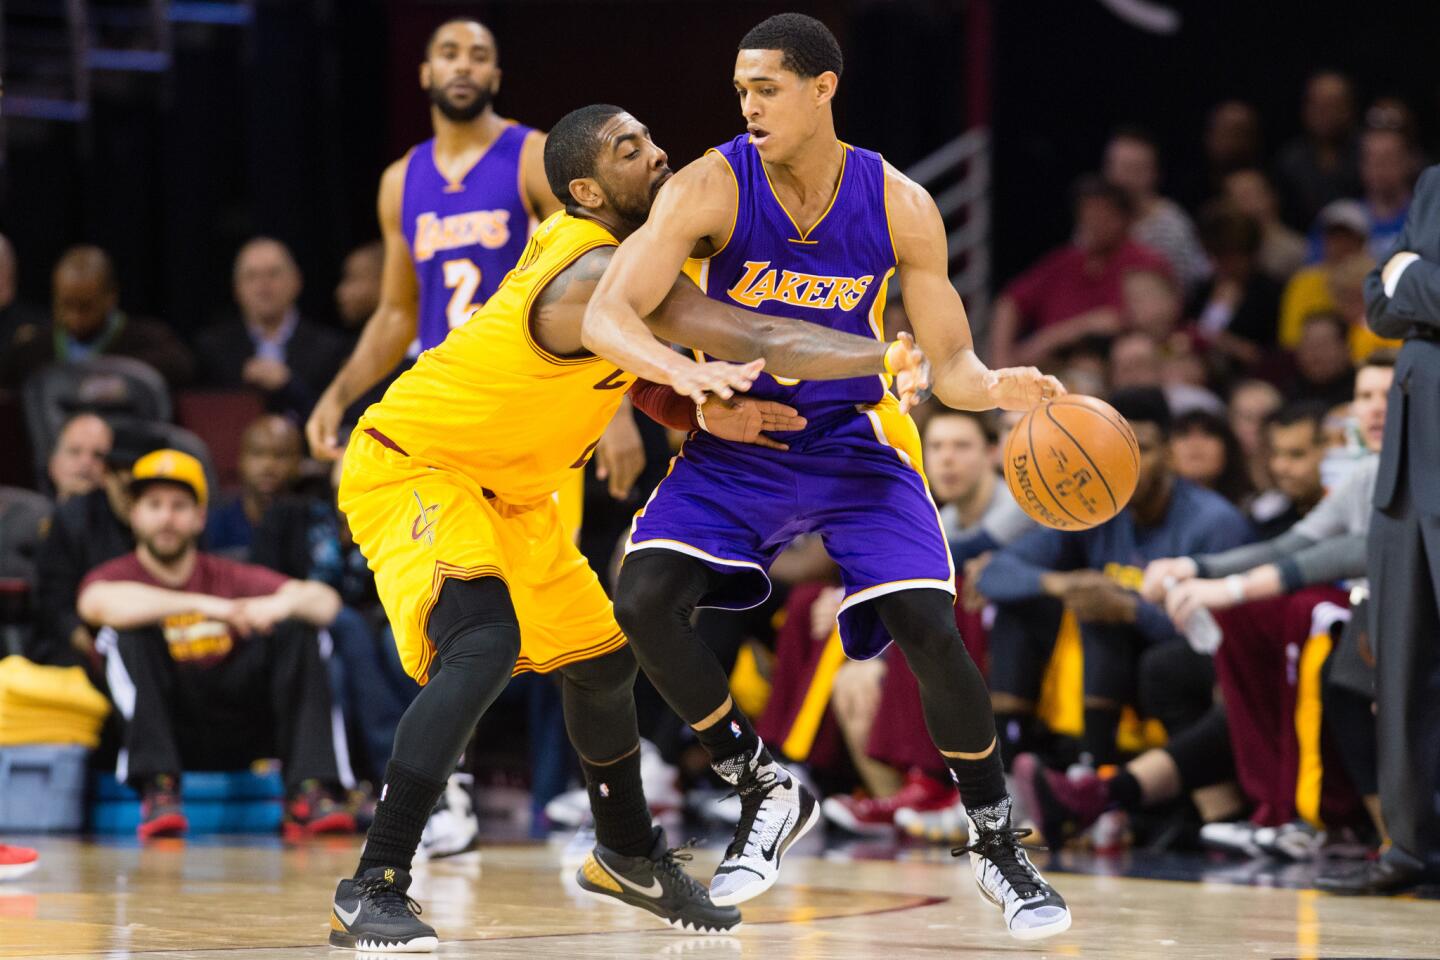 Cavaliers point guard Kyrie Irving tries to steal the ball from Lakers point guard Jordan Clarkson in the second half.